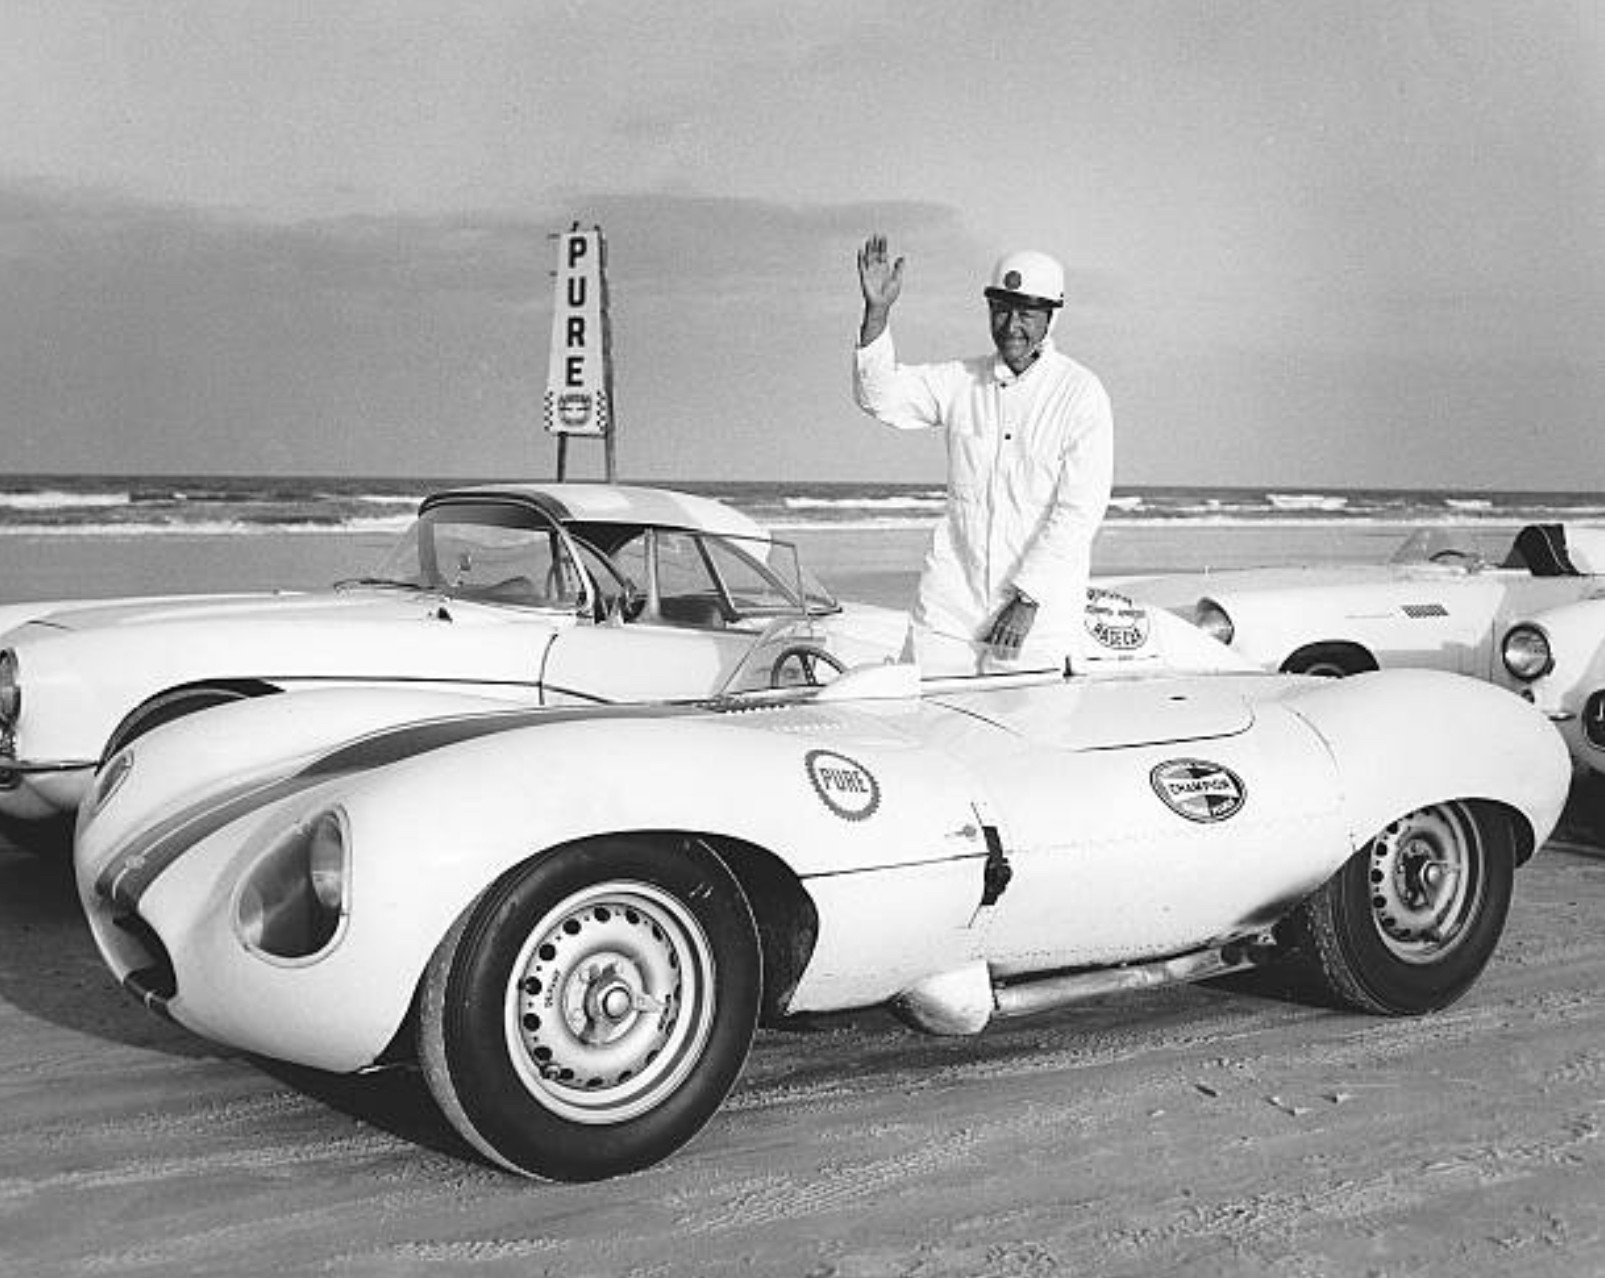 Was the First Corvette to Race Also the First Engine-Swapped Corvette?